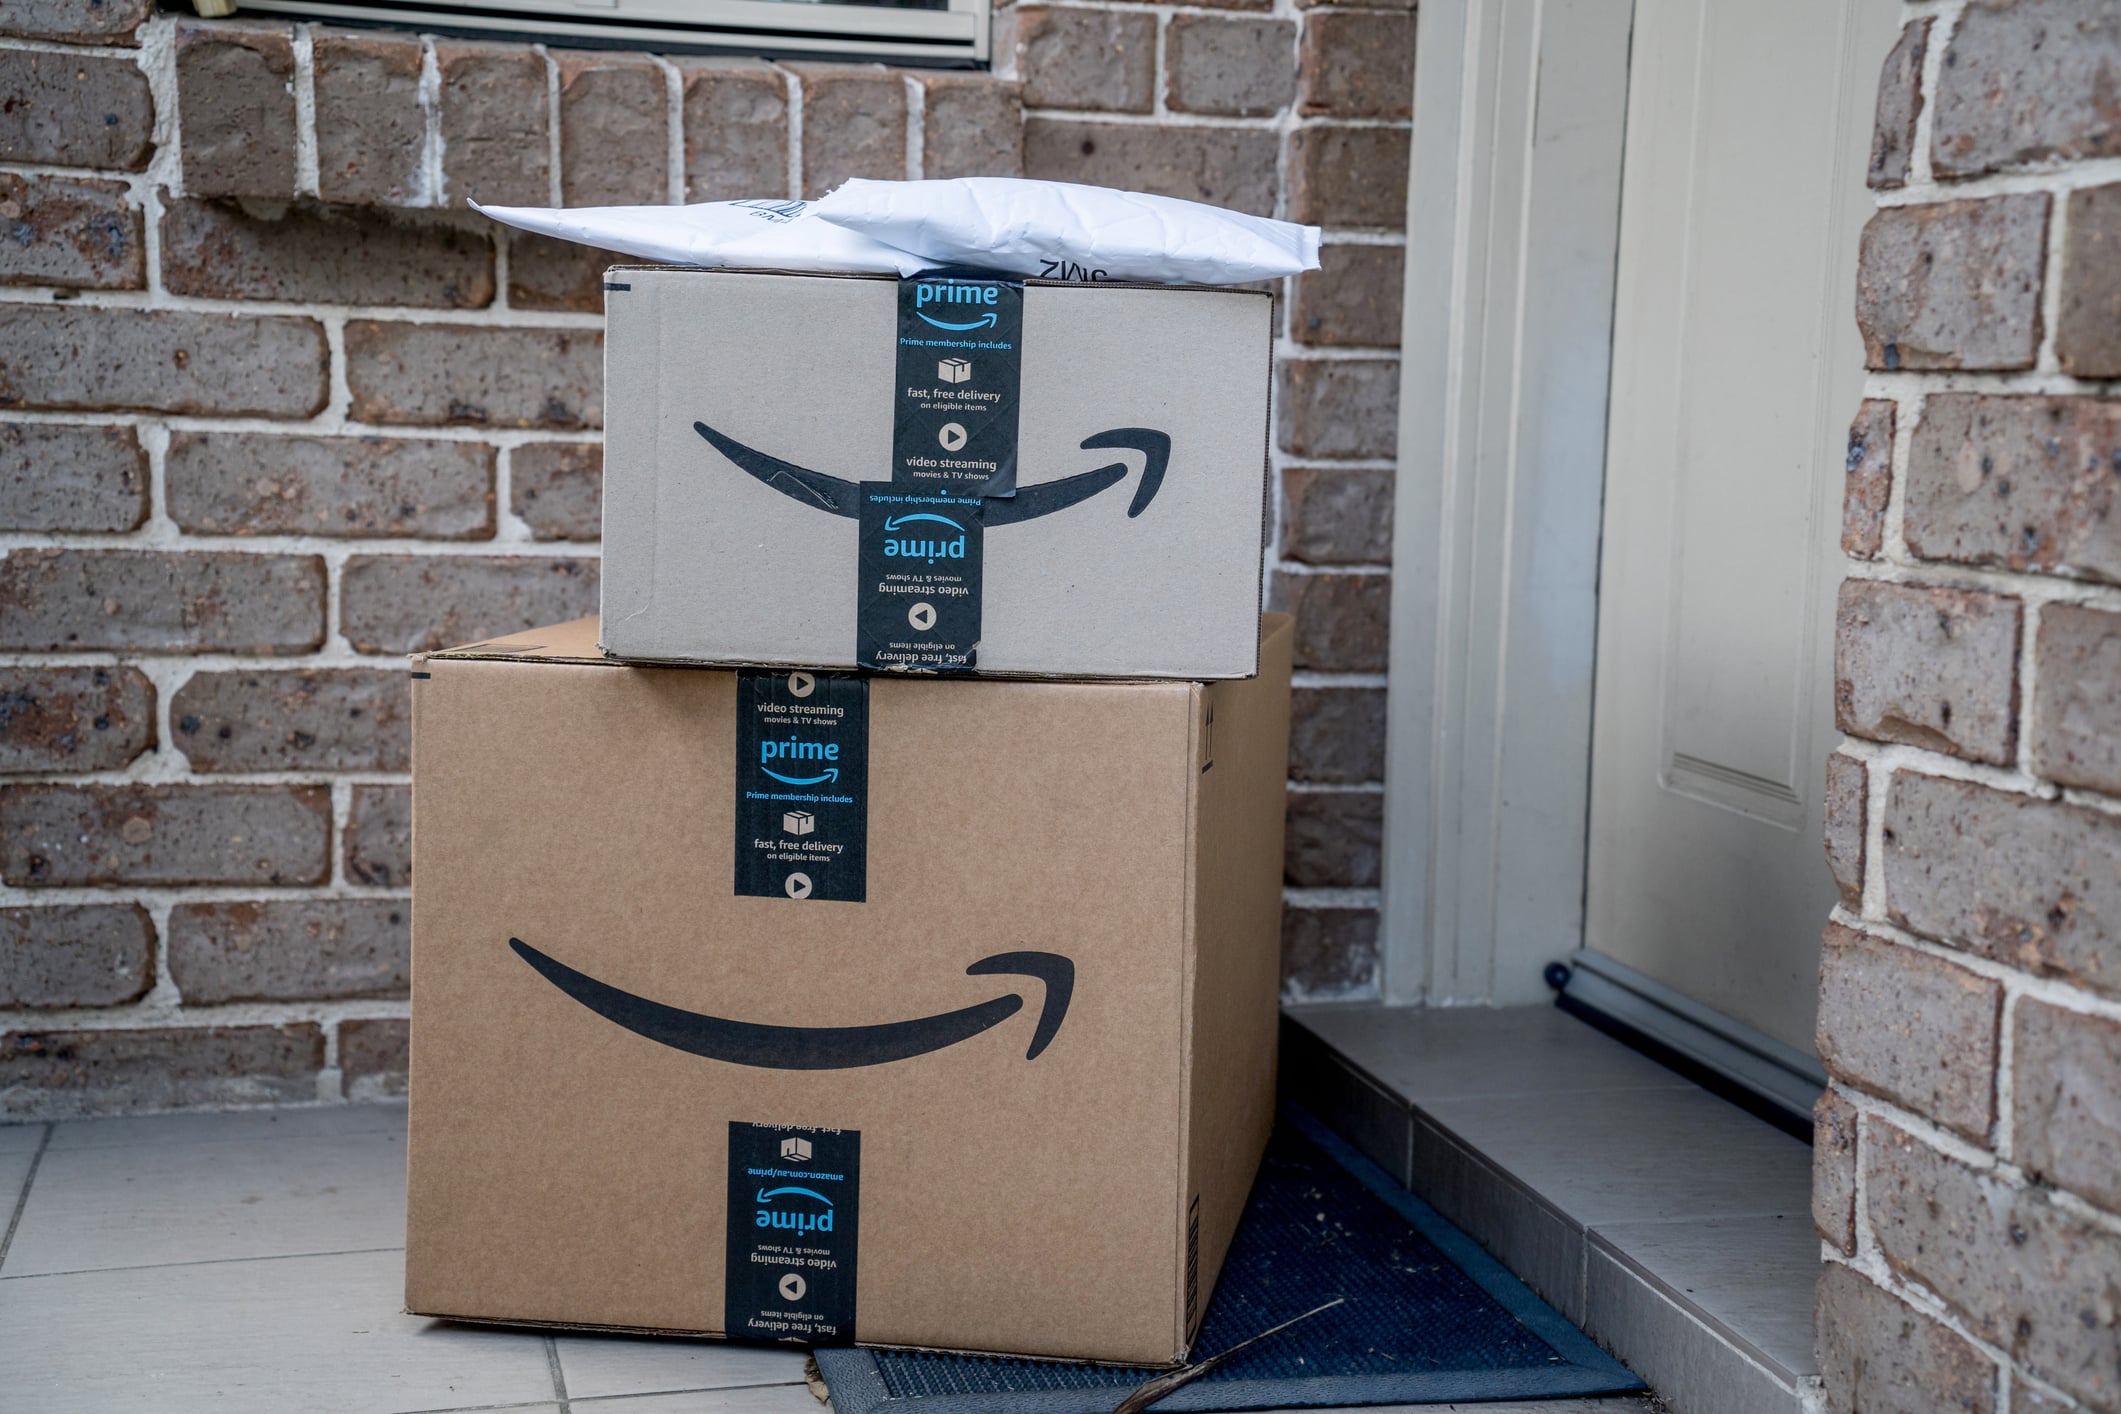 Prime Day Amazon boxes and envelope on a porch with brick wall behind them.